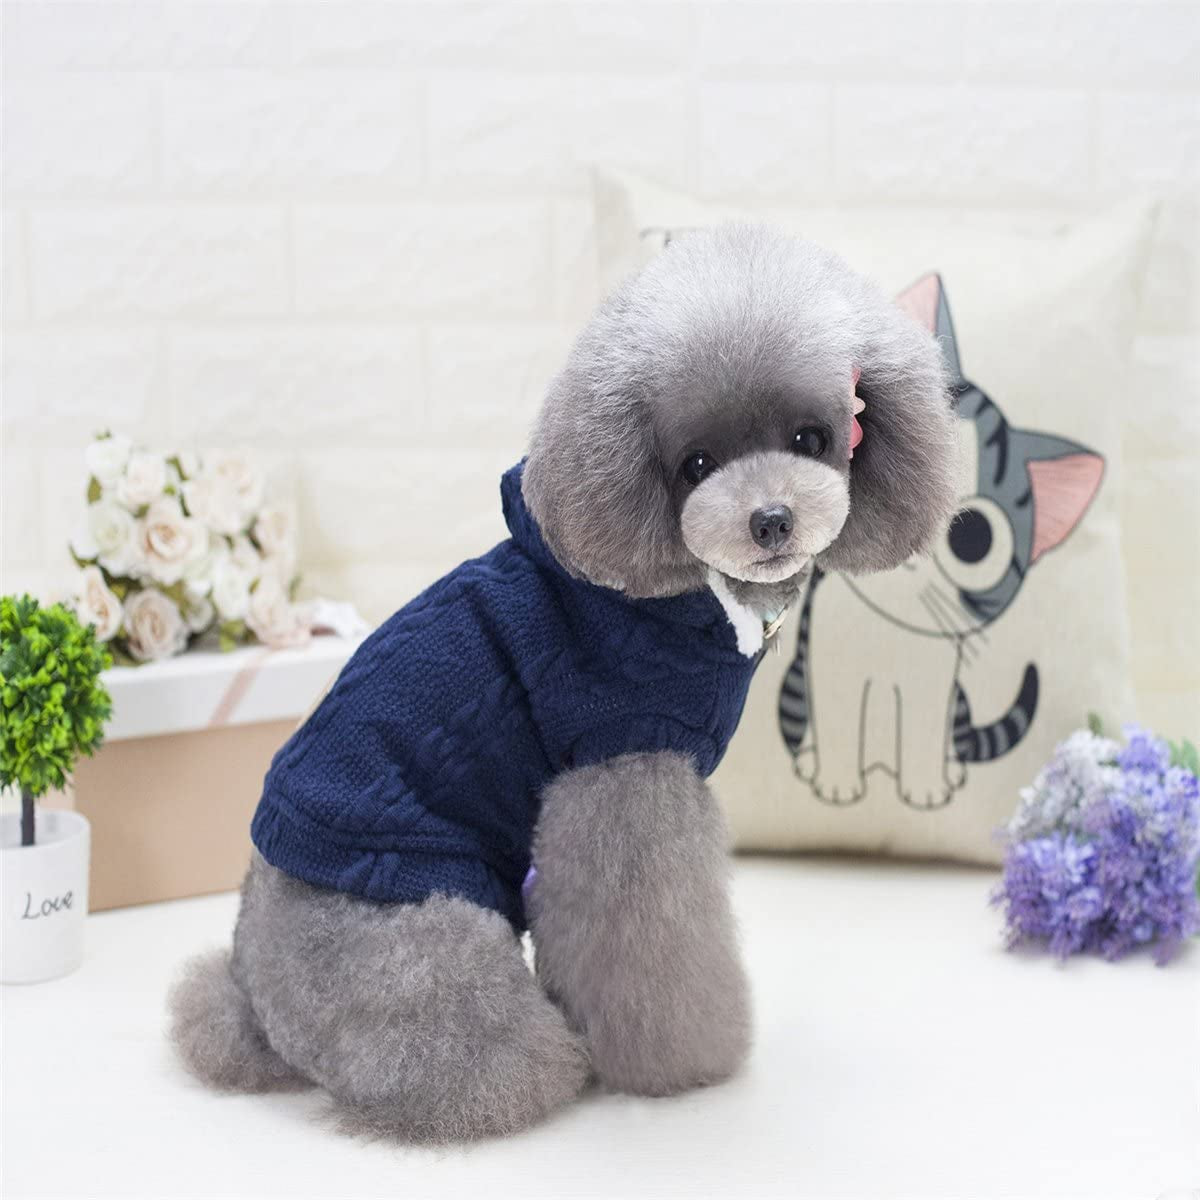 Dog Sweater, Bwealth 2 Layers Fleece Lined Warm Dog Clothes - Classic Knitted Winter Small Dog Jumper Coat - Pet Apparel Jacket Dog Sweaters for Small Dogs Cats Puppy Boy Girl (Medium, Dark Blue)